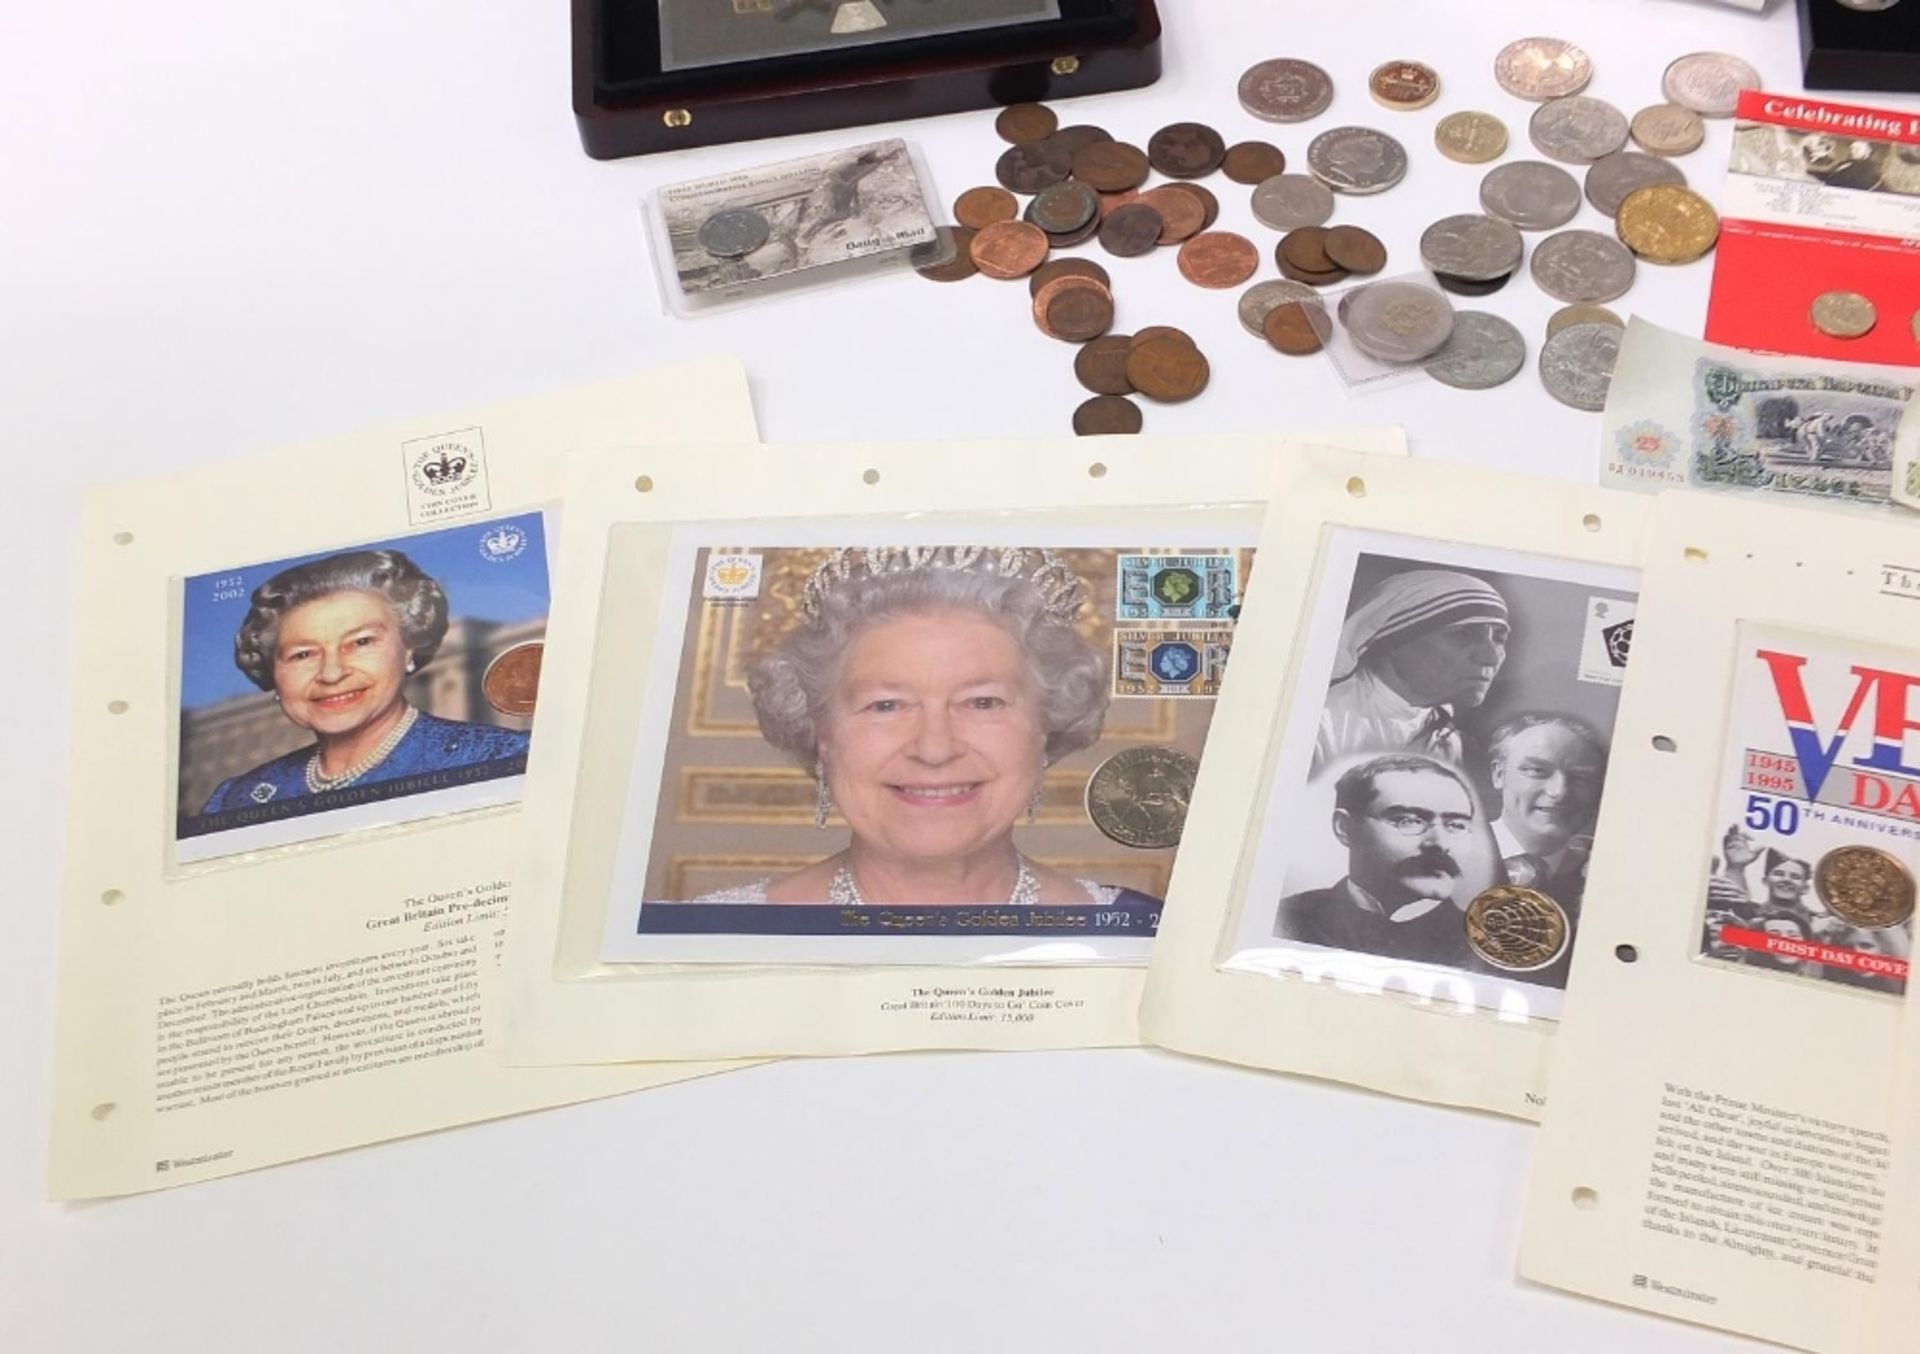 British commemorative coinage, some proof, including five pound coins, two pound coins, - Image 8 of 9